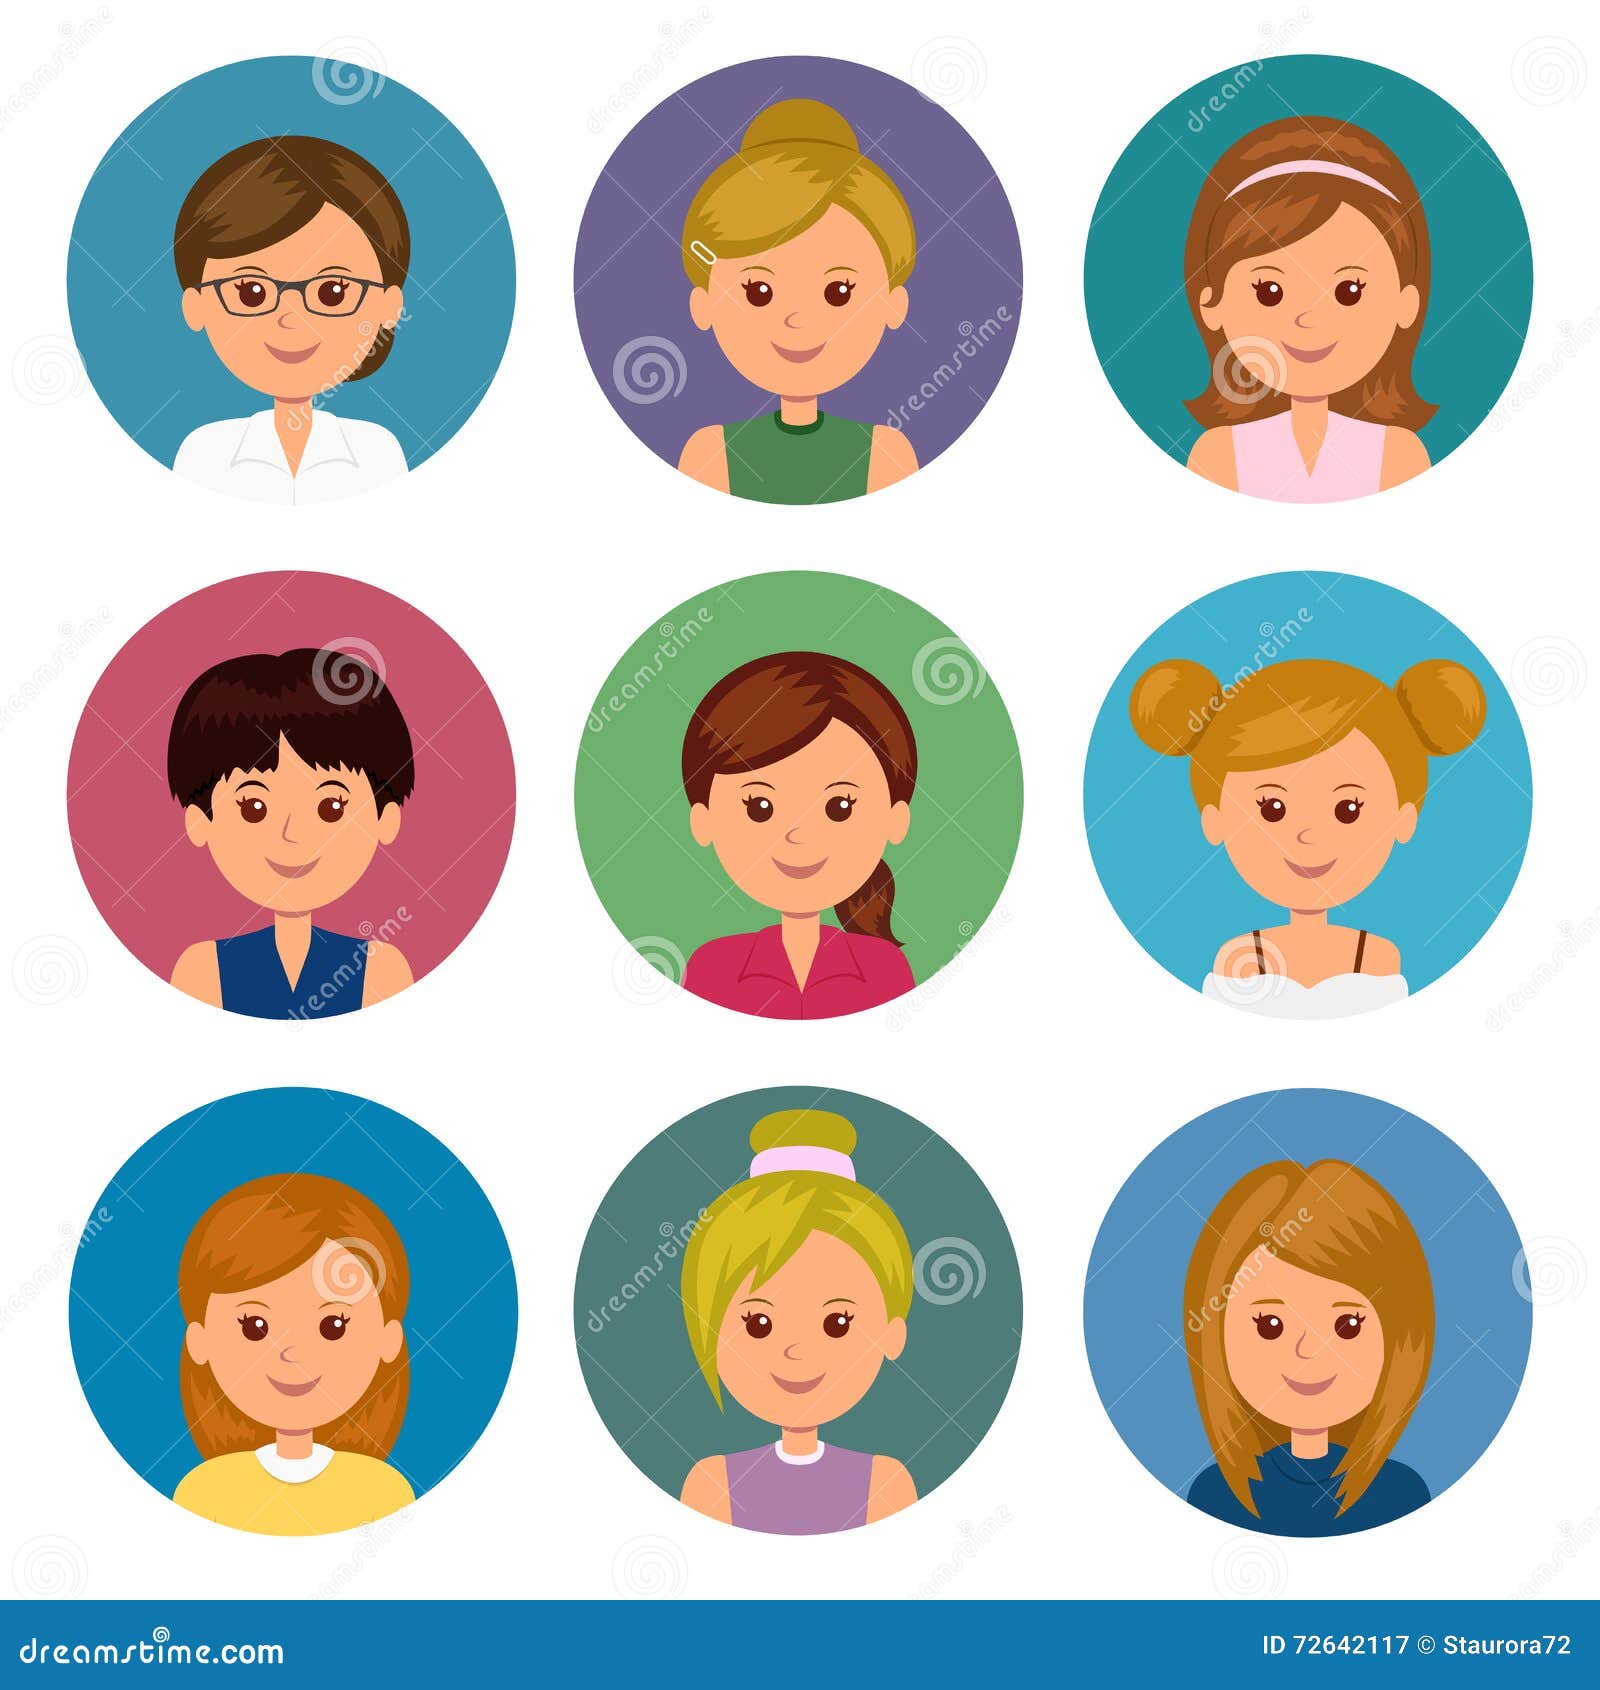 User Avatar Vector Art Icons and Graphics for Free Download